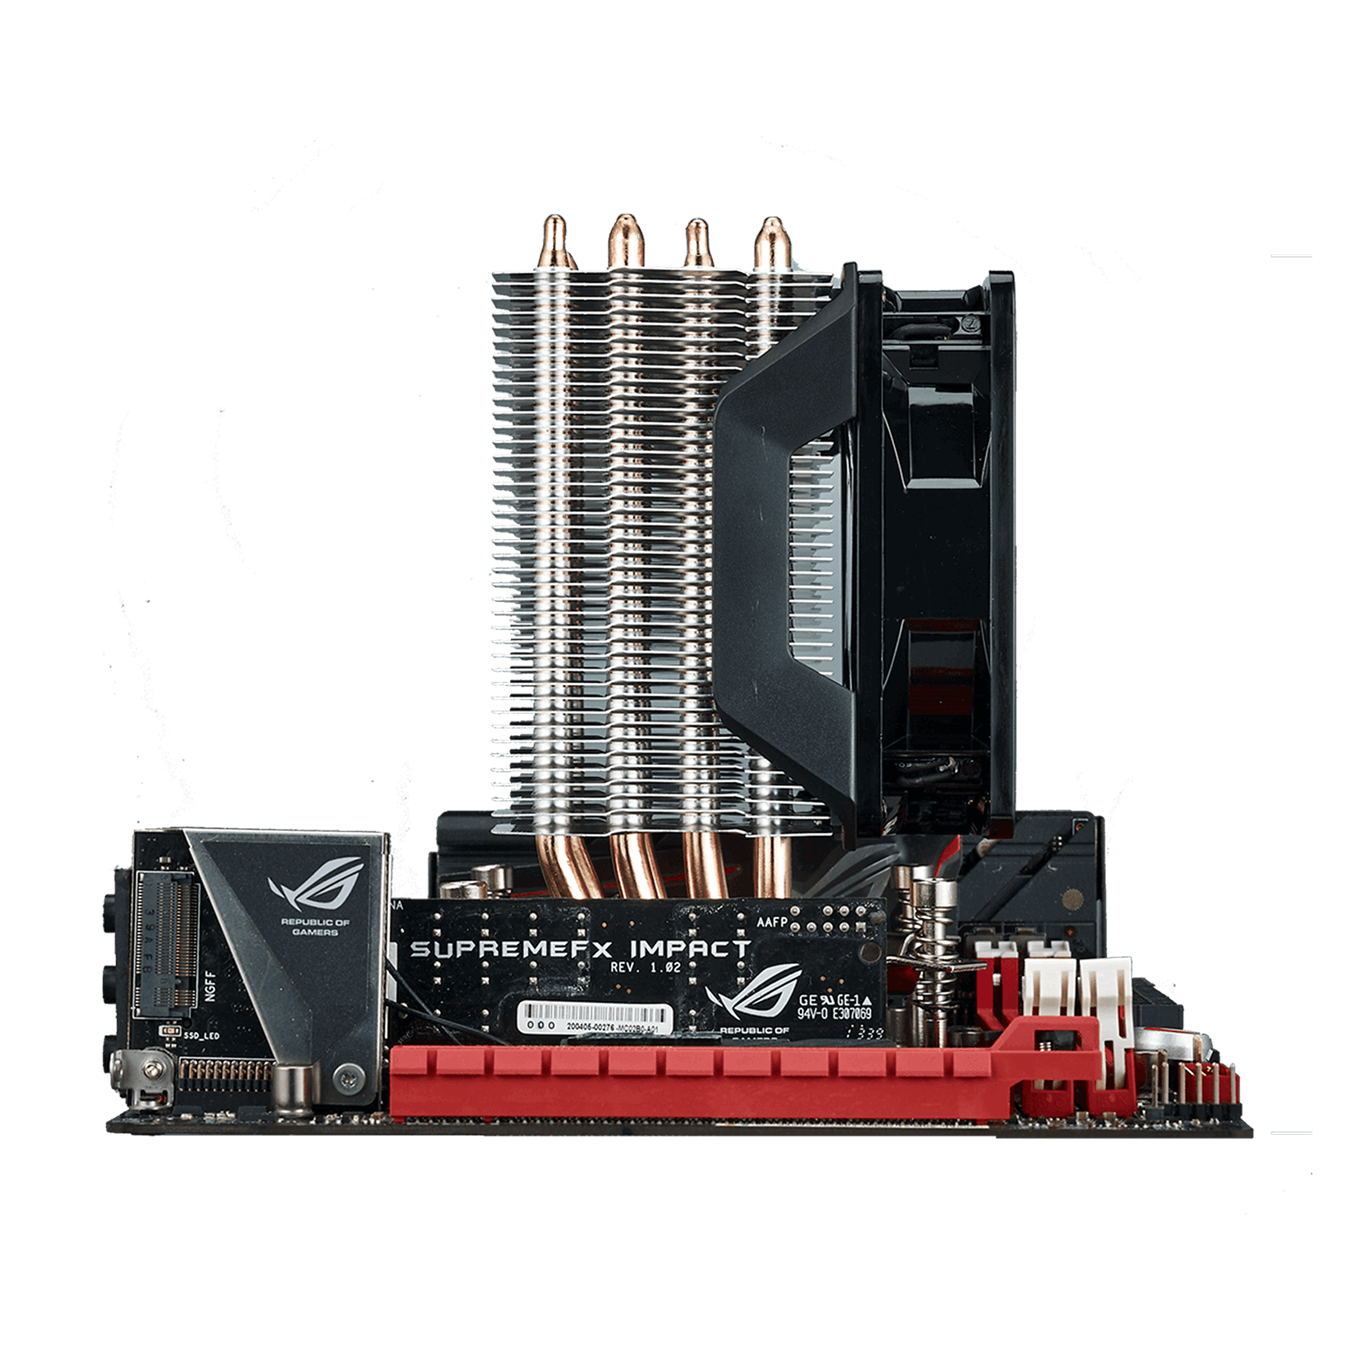 Stacked fin array ensures minimum airflow resistance allowing cooler air into the heat sink